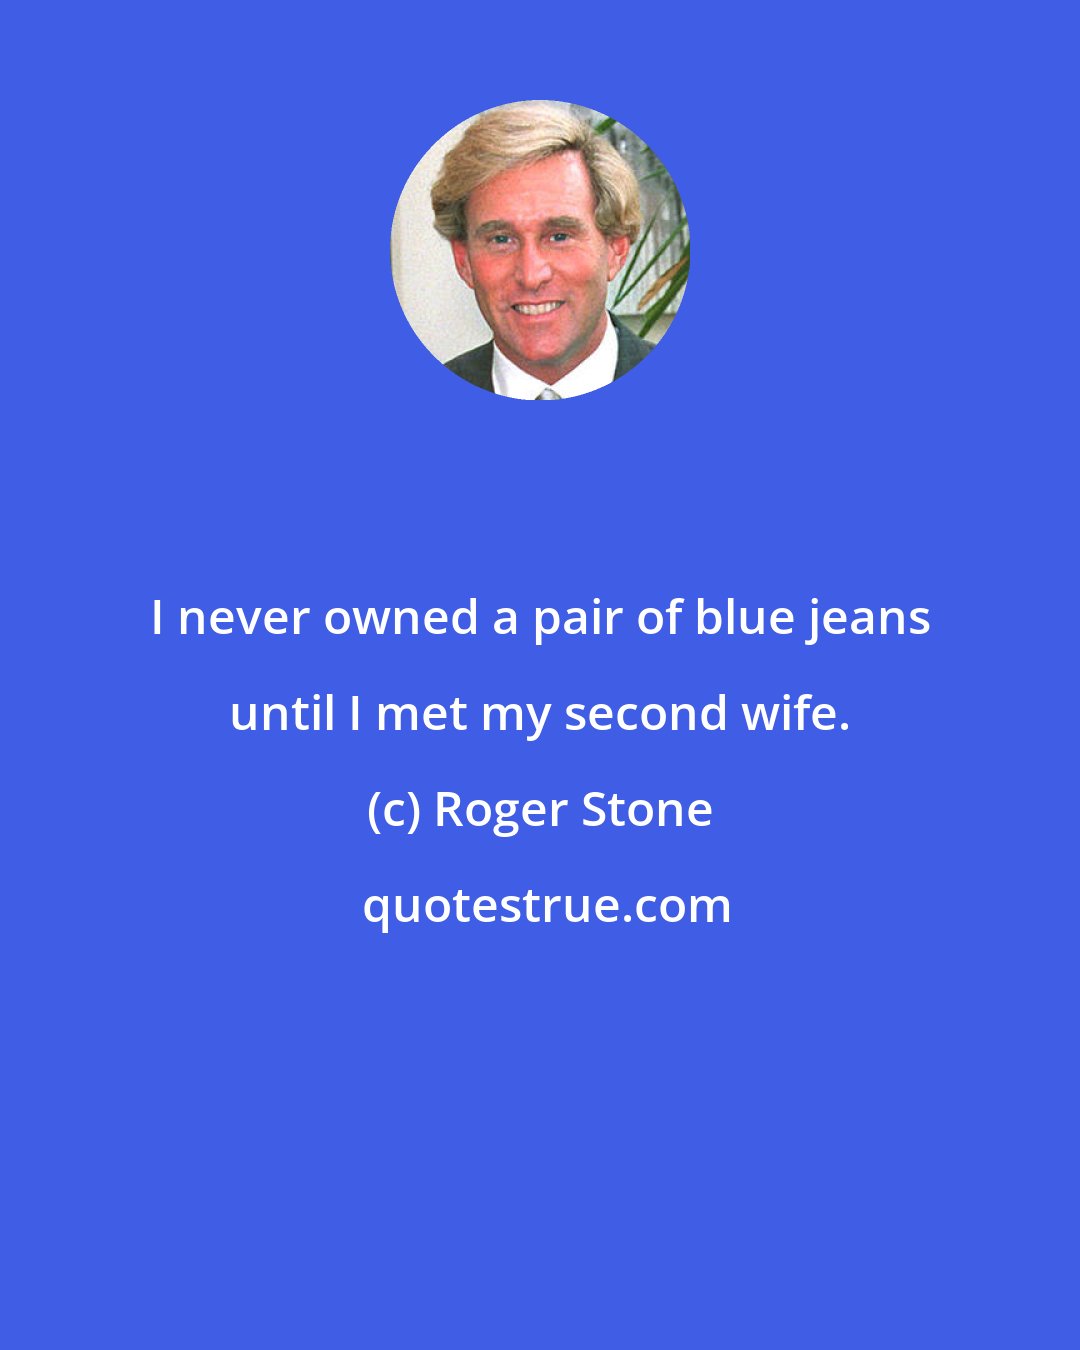 Roger Stone: I never owned a pair of blue jeans until I met my second wife.